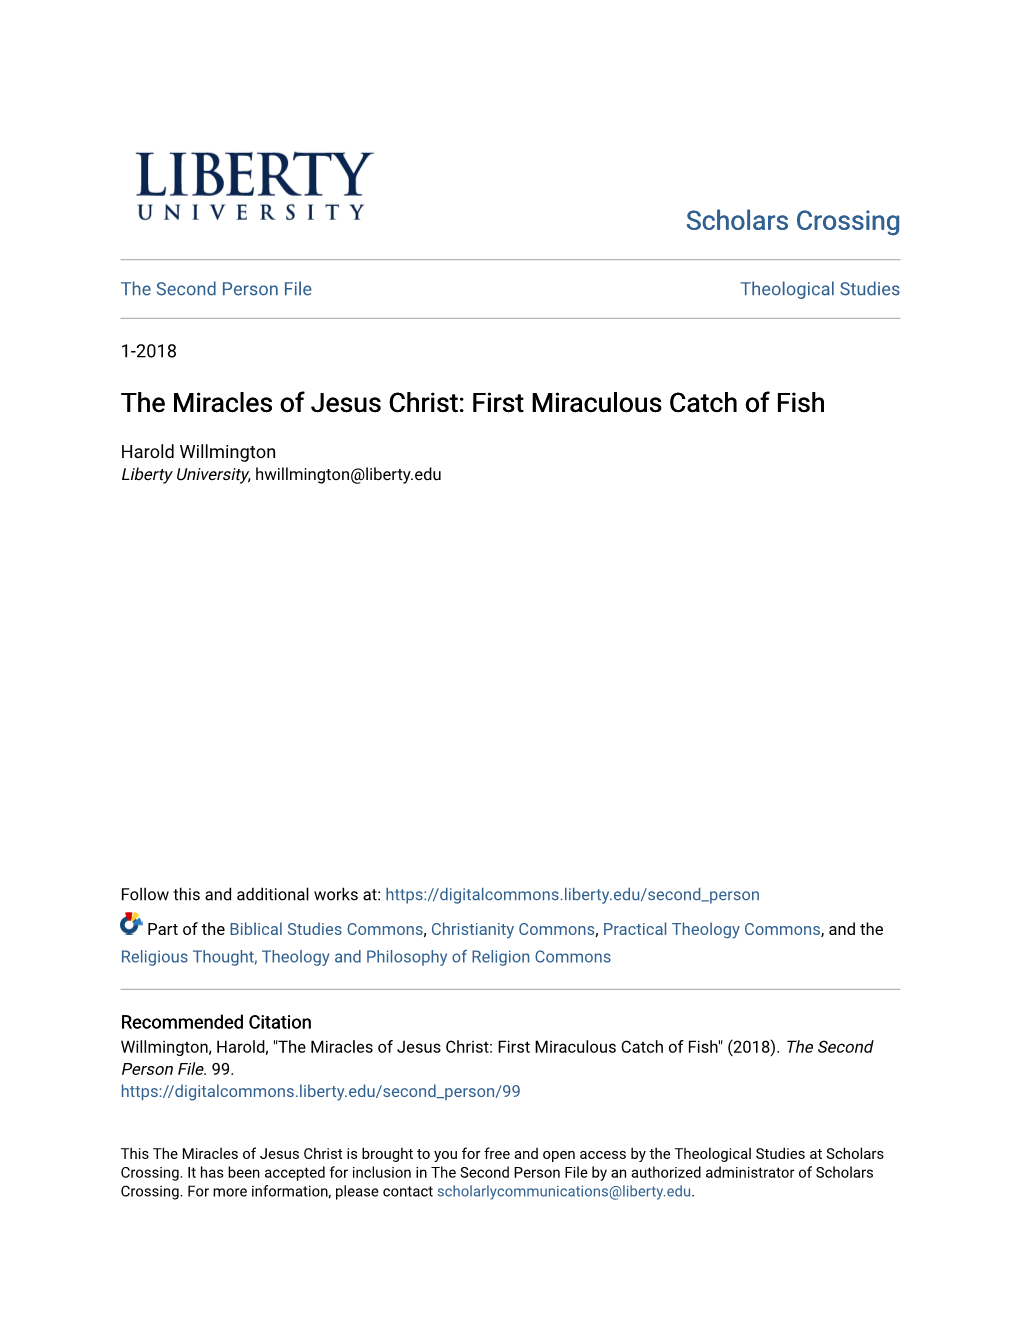 The Miracles of Jesus Christ: First Miraculous Catch of Fish